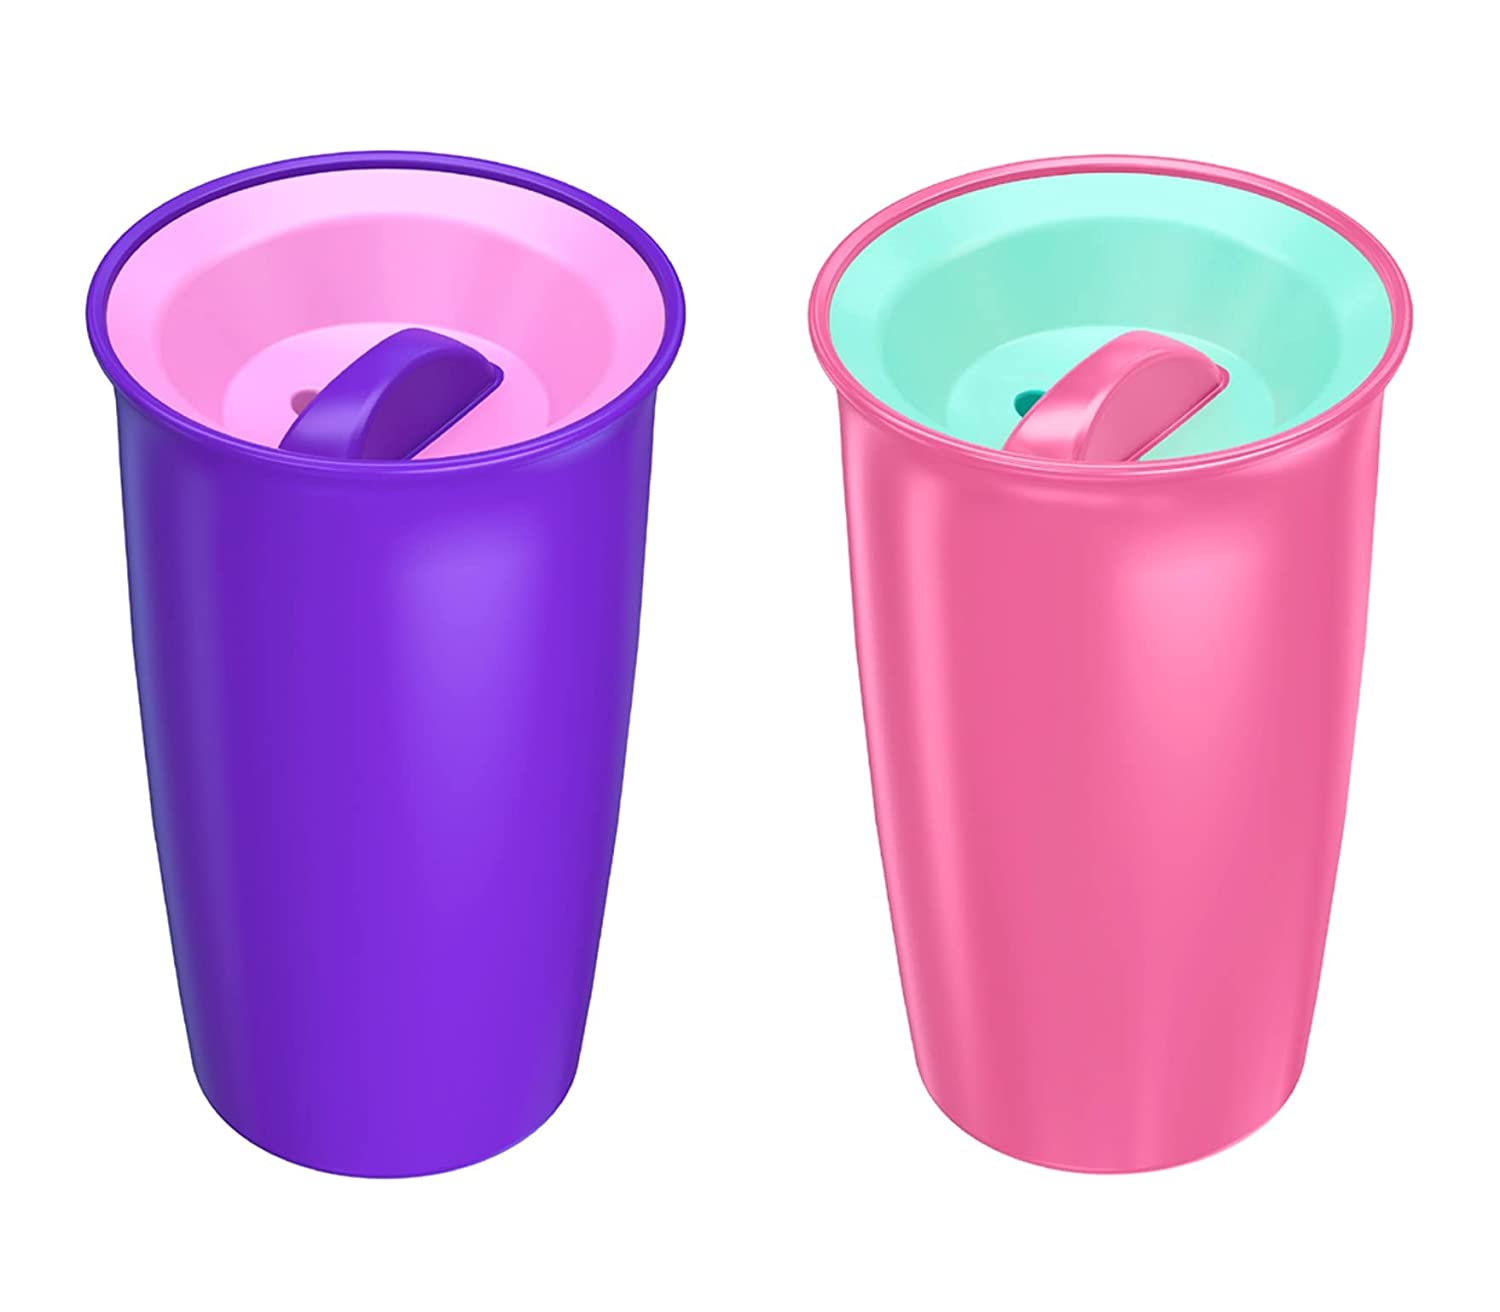 Wow Cup for Kids Original 360 Sippy Cup, Pink with Blue Lid, 9 oz